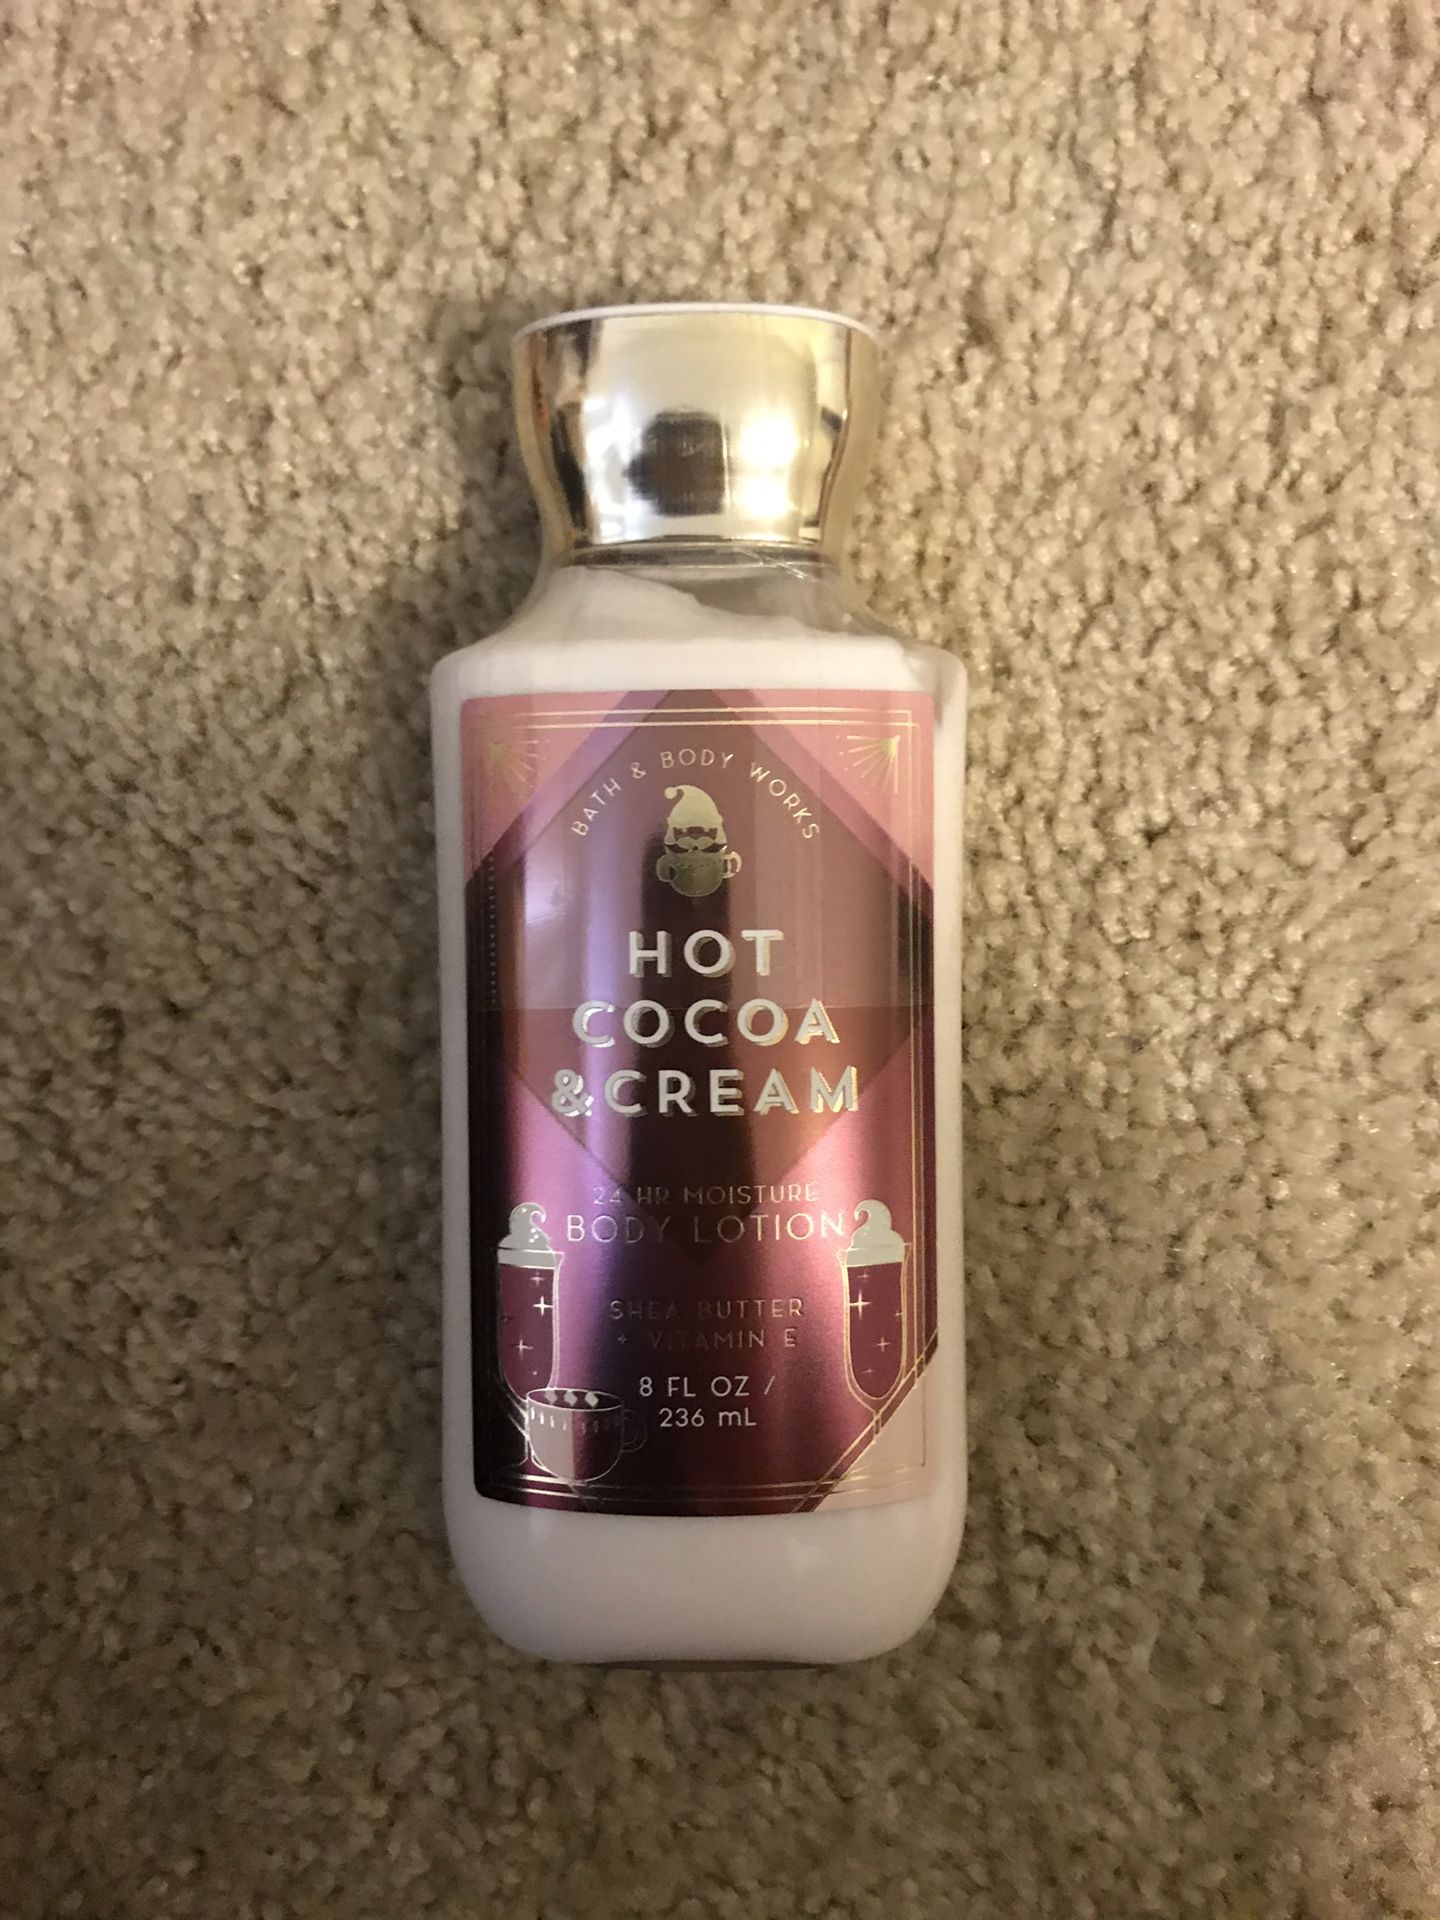 Bath and body lotion